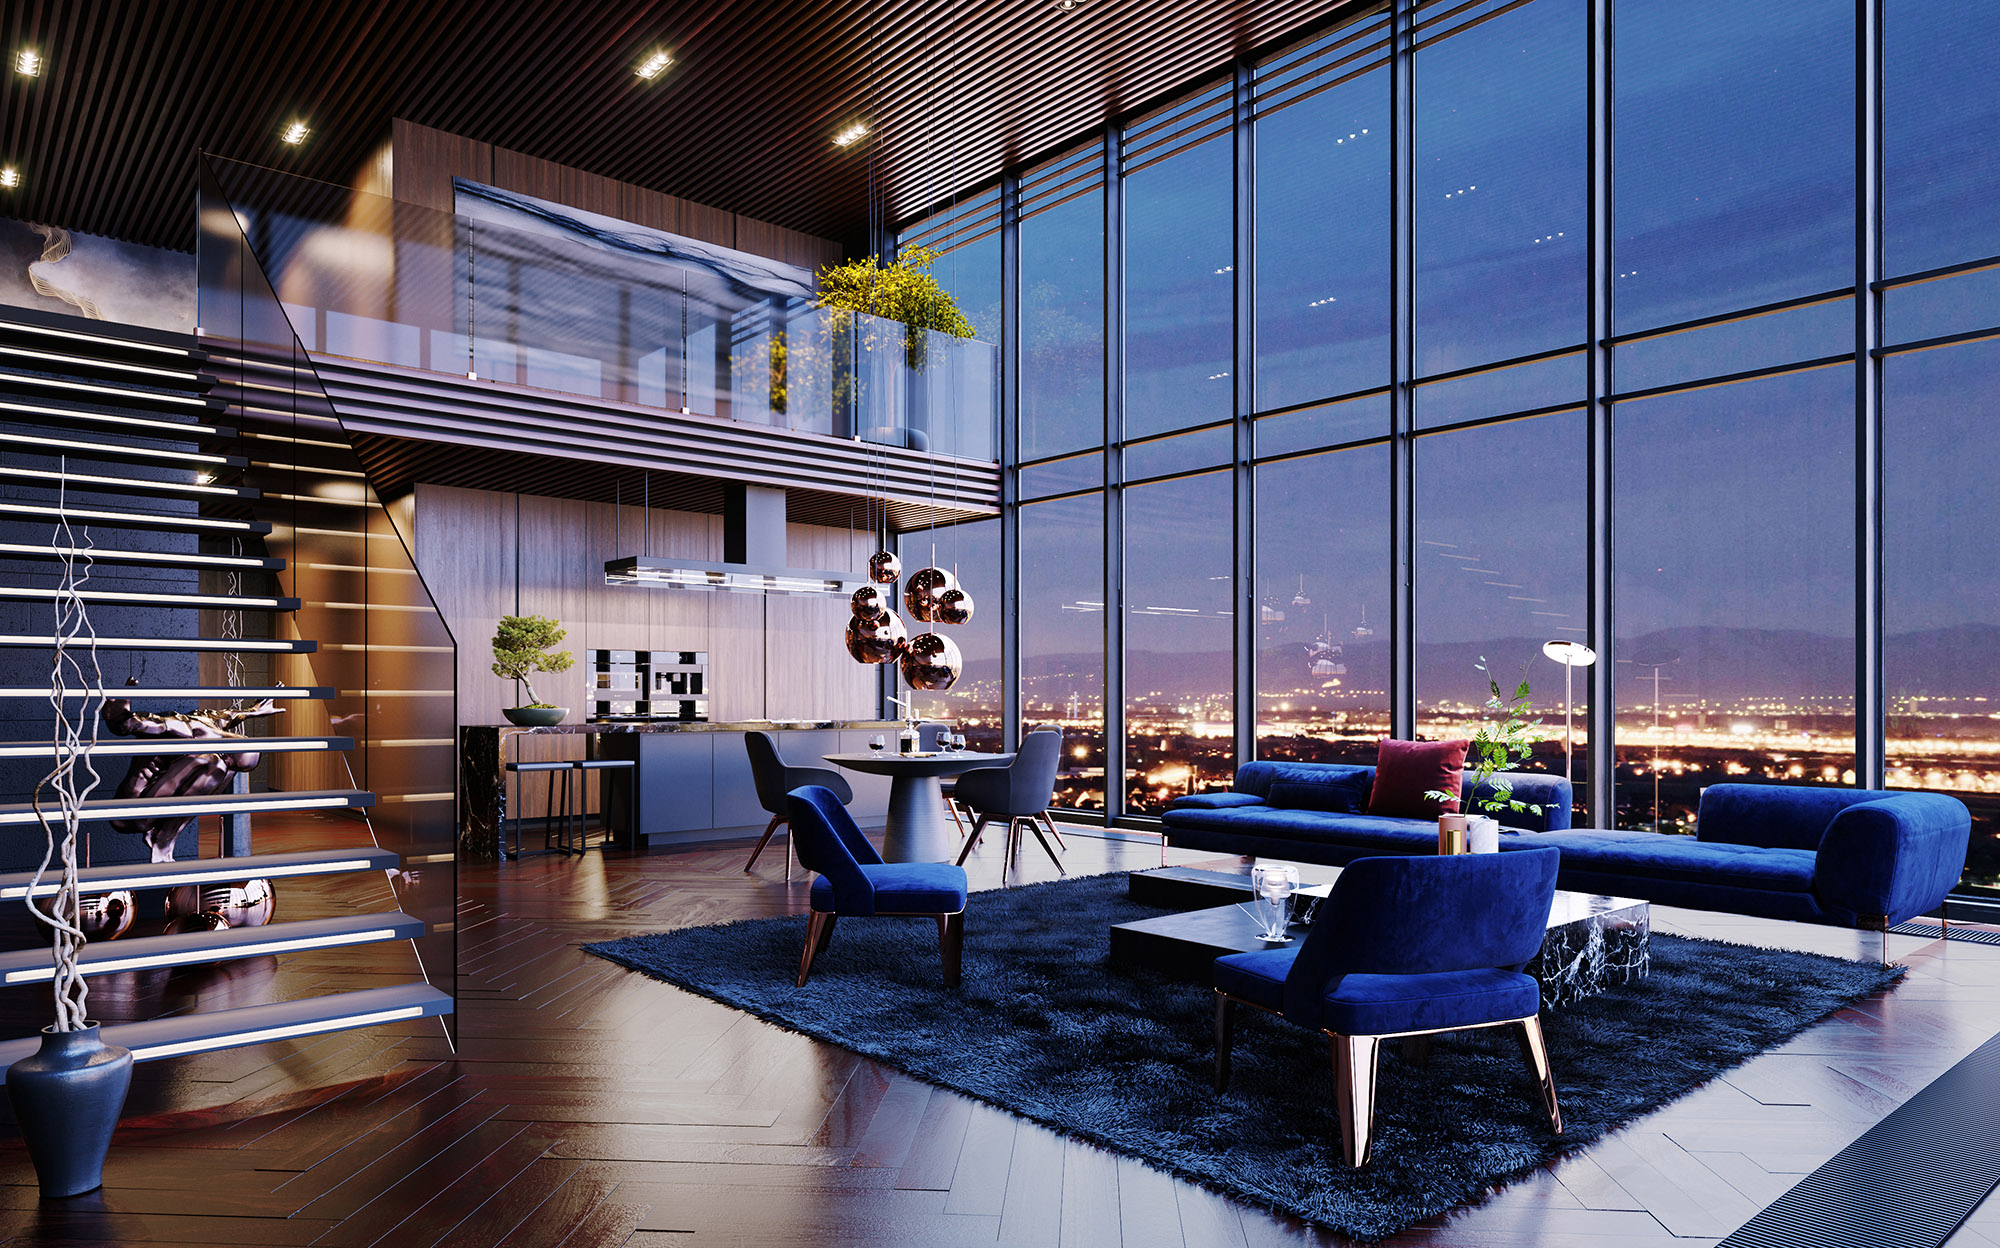 Luxury Penthouse in Los Angeles, USA is a collaborative work with Yuriy Bob...